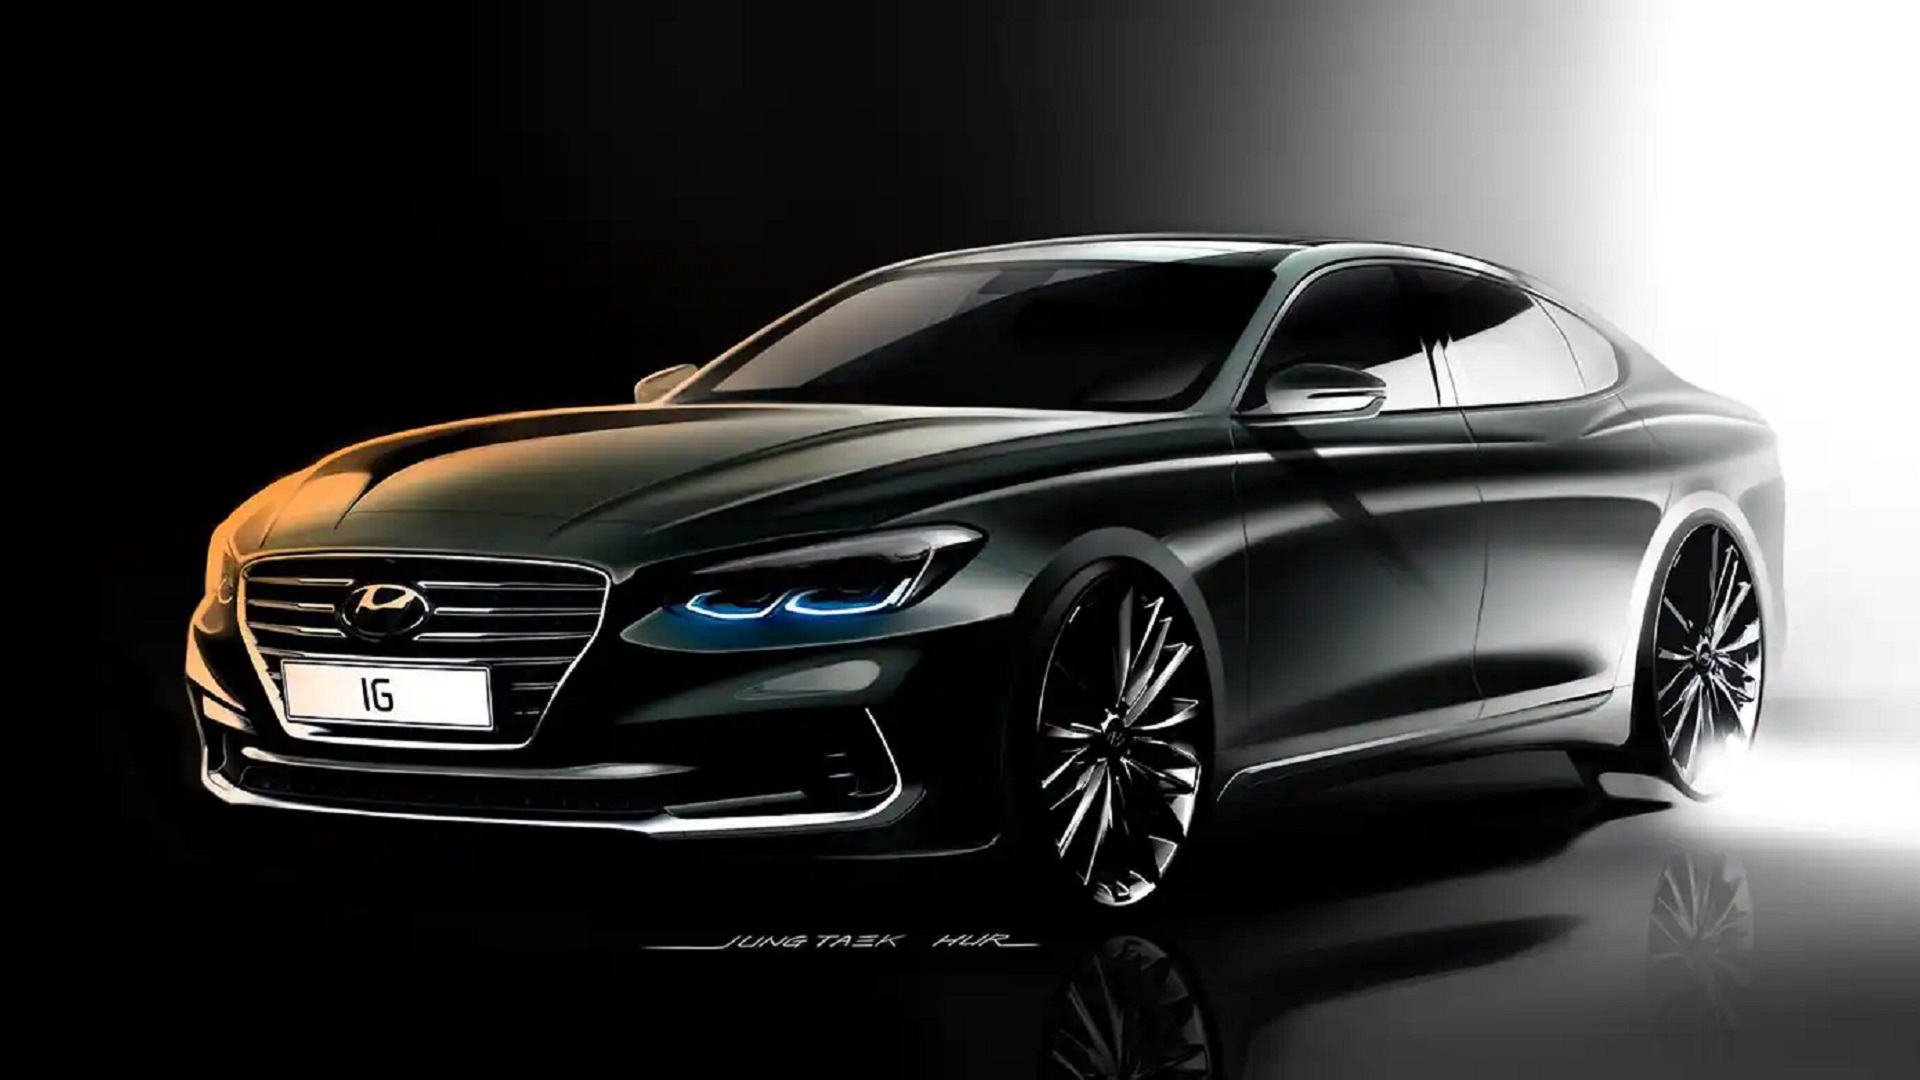 Hyundai Motor unveils first renderings of the All-new Azera